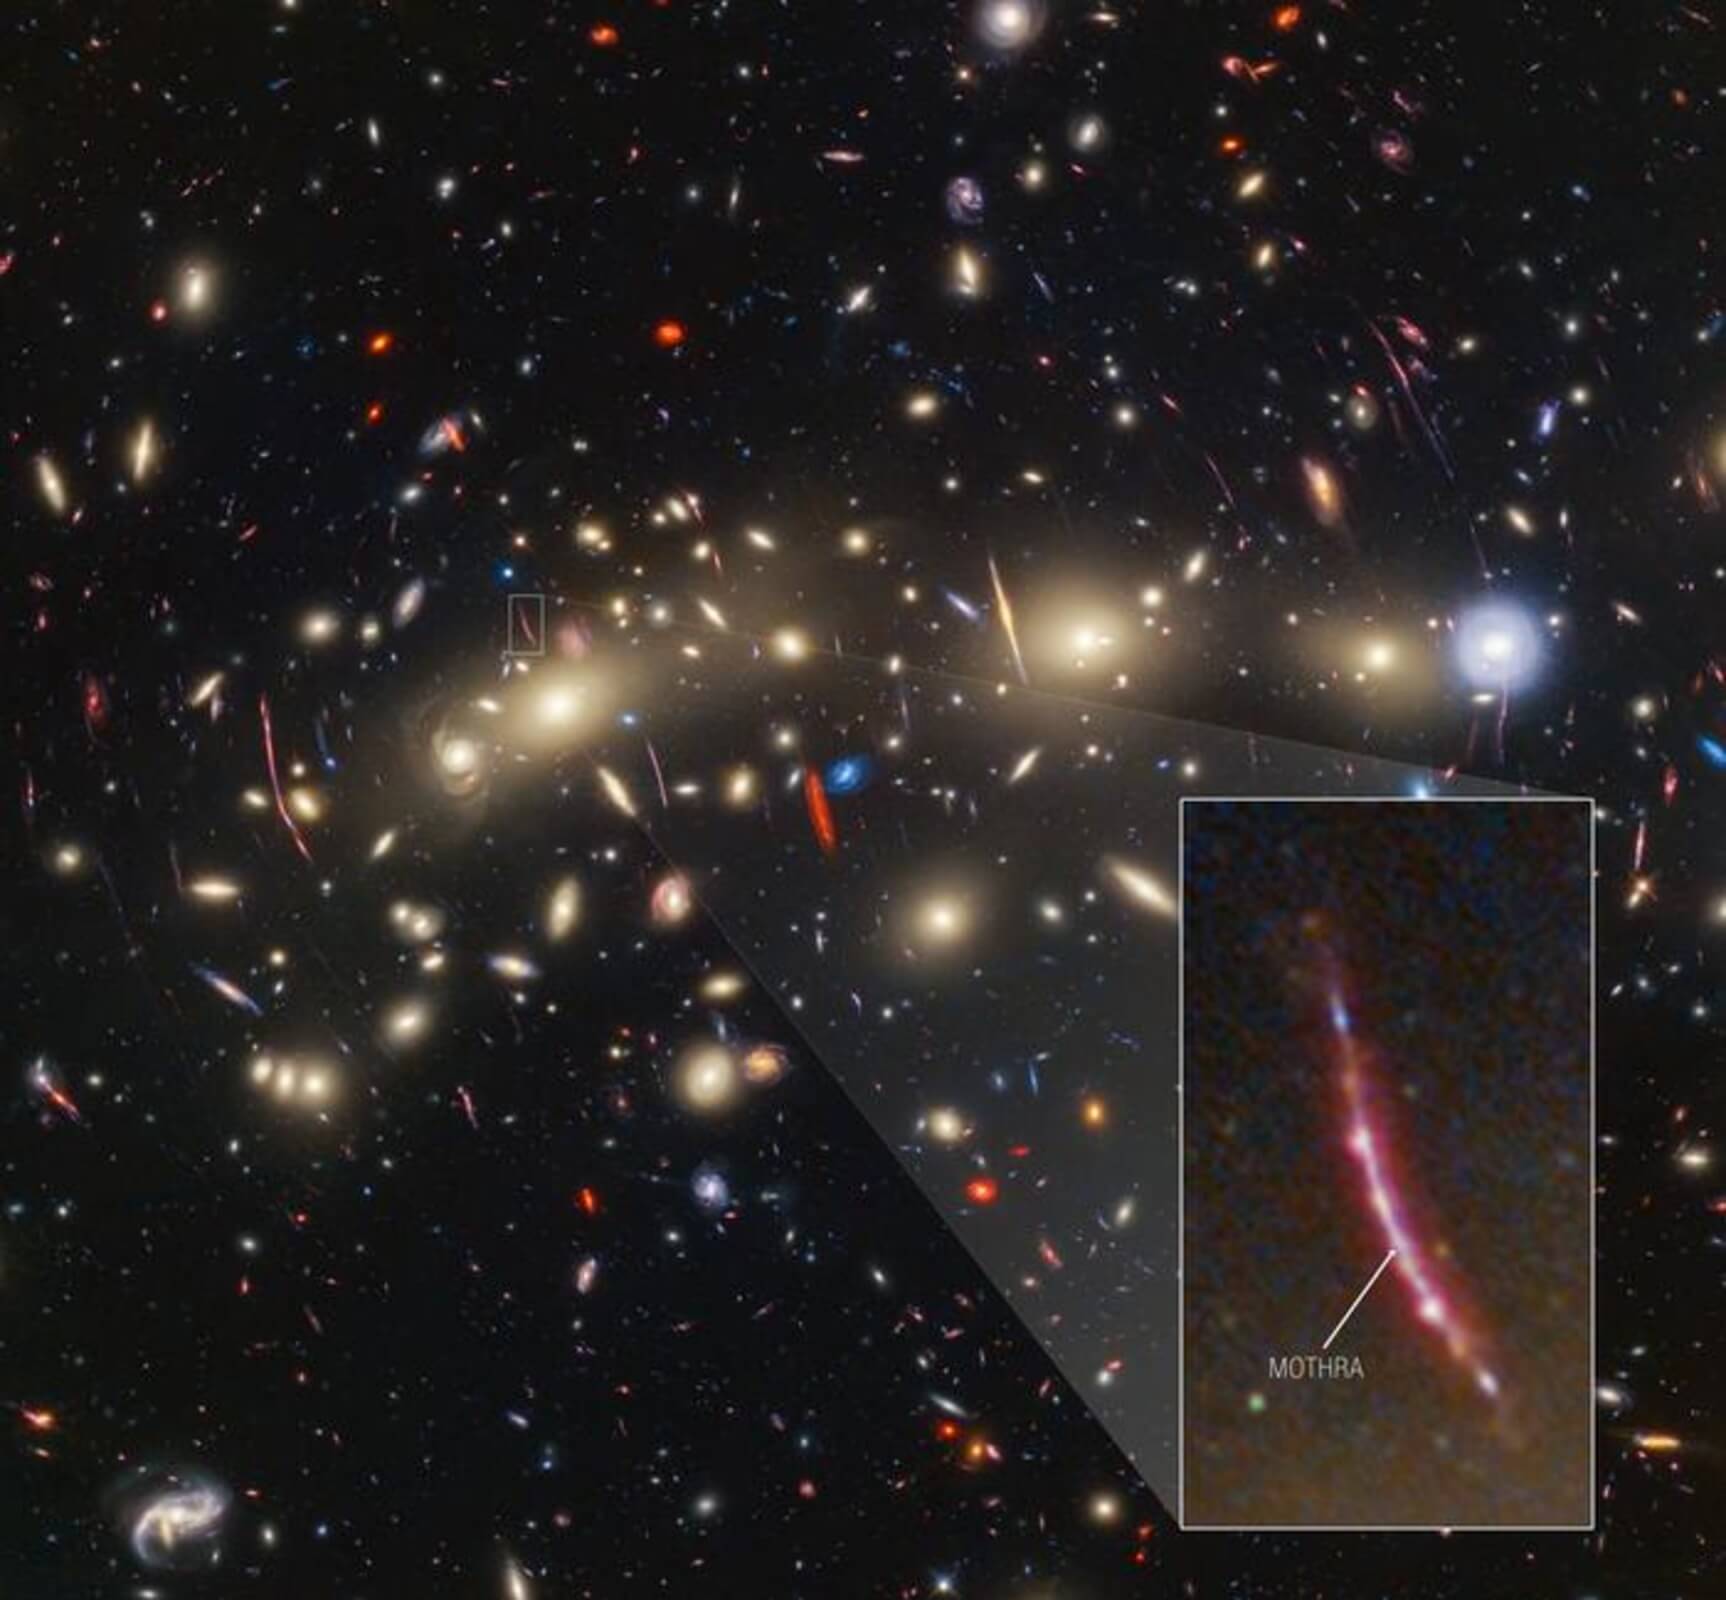 This image of galaxy cluster MACS0416 highlights one particular gravitationally lensed background galaxy, which existed about 3 billion years after the big bang